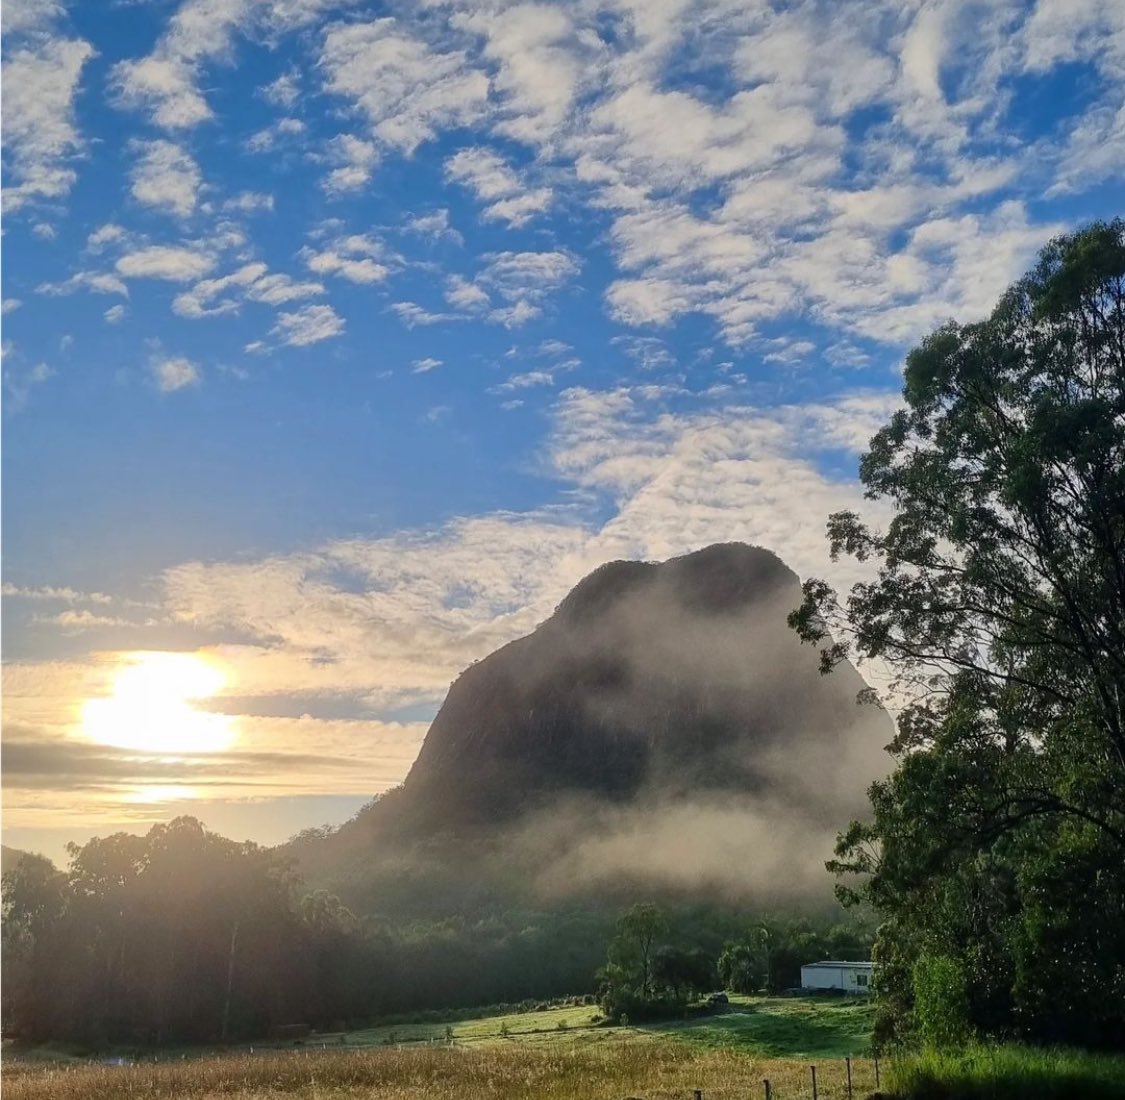 Swipe for a Sunrise on little Tib looking over big Tib. 
Enjoy the sun while it is out because weather man say it’s going away again
•
#sunrise #clouds #explore #hike #getoutside  #nature #mountains #mttiborgargan #sky #australia #glasshousemountains #qld